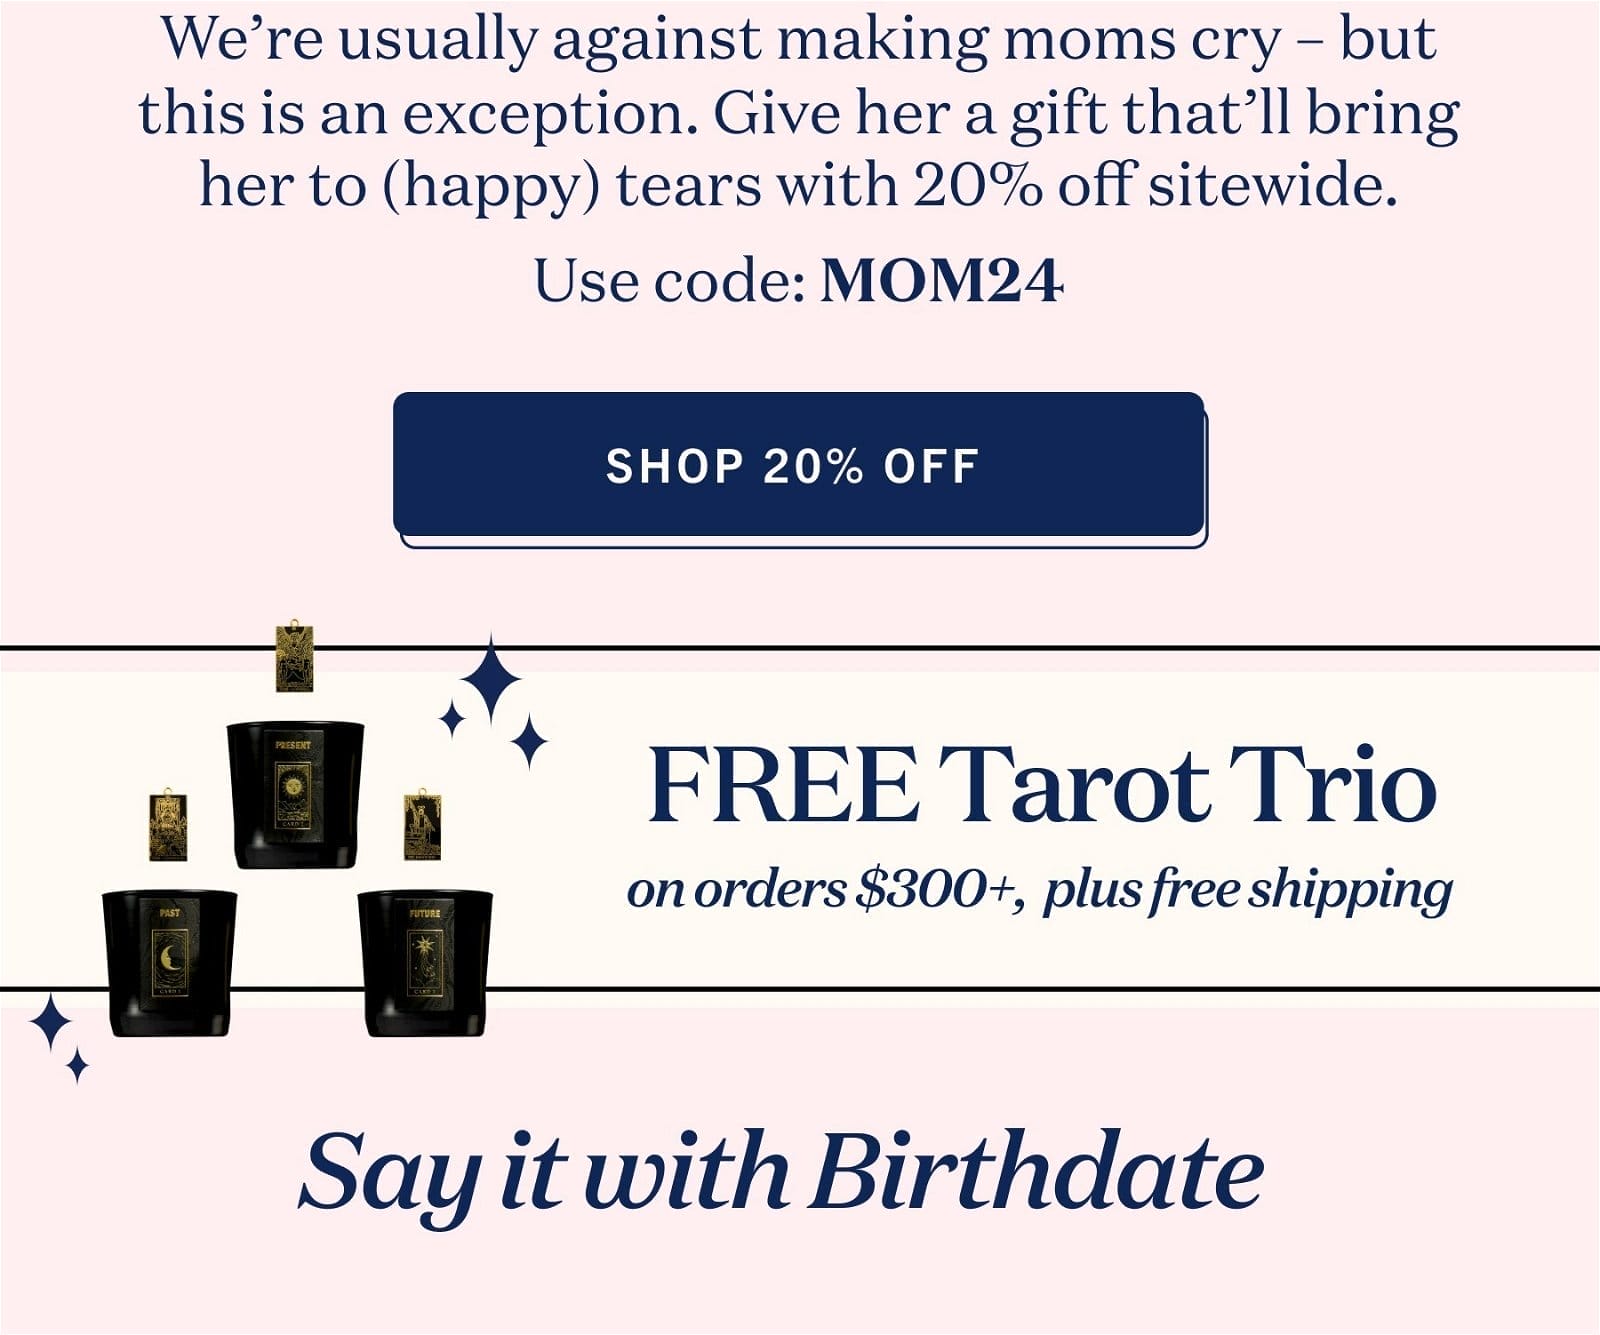 We’re usually against making moms cry – but this is an exception. Give her a gift that’ll bring her to (happy) tears with 20% off sitewide. Use code: MOM24 sHOP 20% Off FREE Tarot Trio